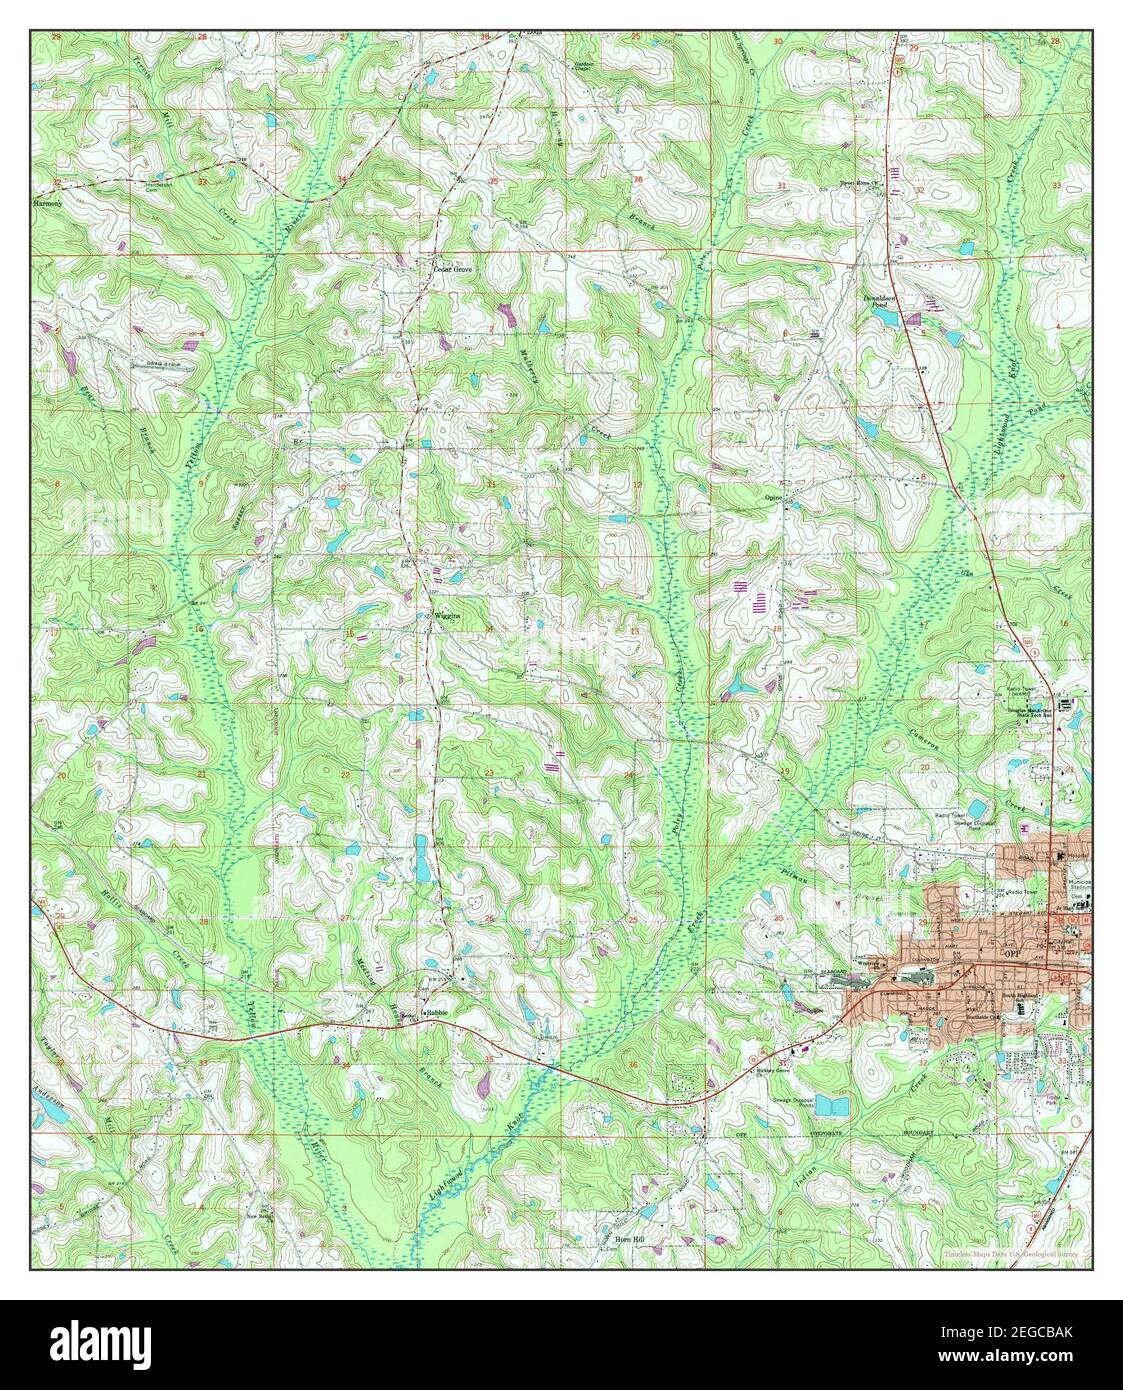 Opp West, Alabama, map 1971, 1:24000, United States of America by Timeless Maps, data U.S. Geological Survey Stock Photo